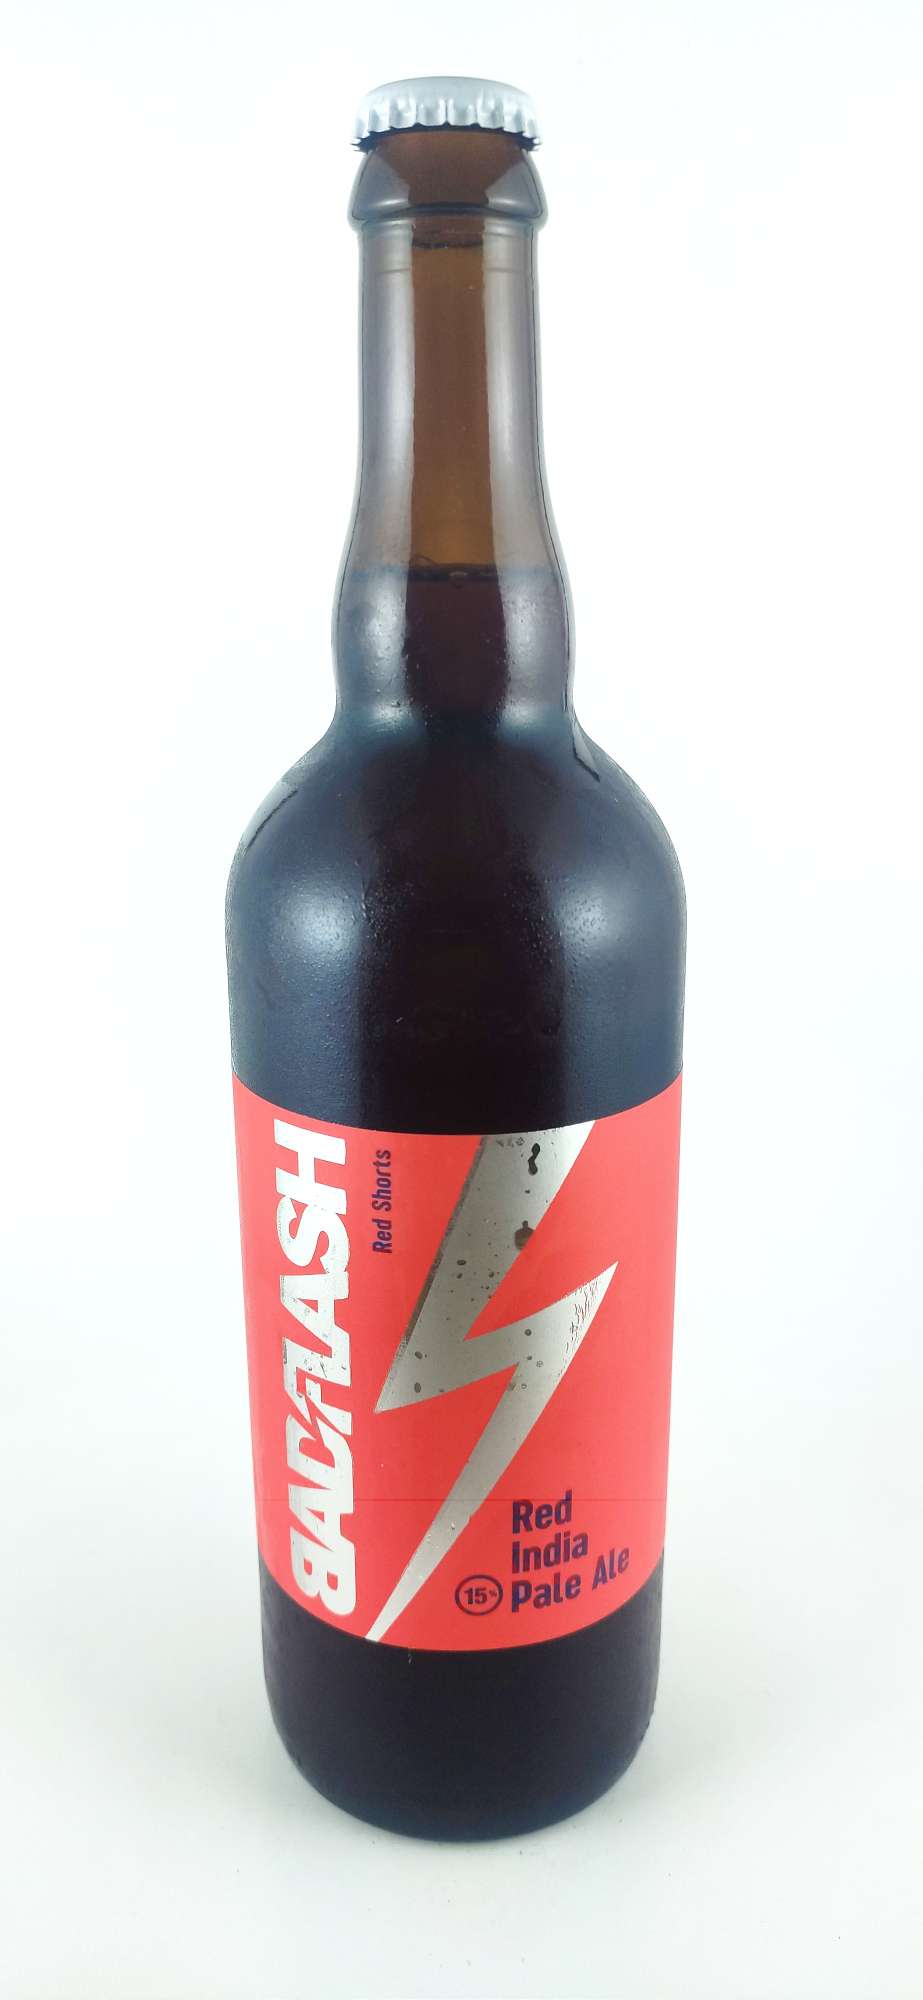 Bad Flash Red Shorts RED IPA 15°